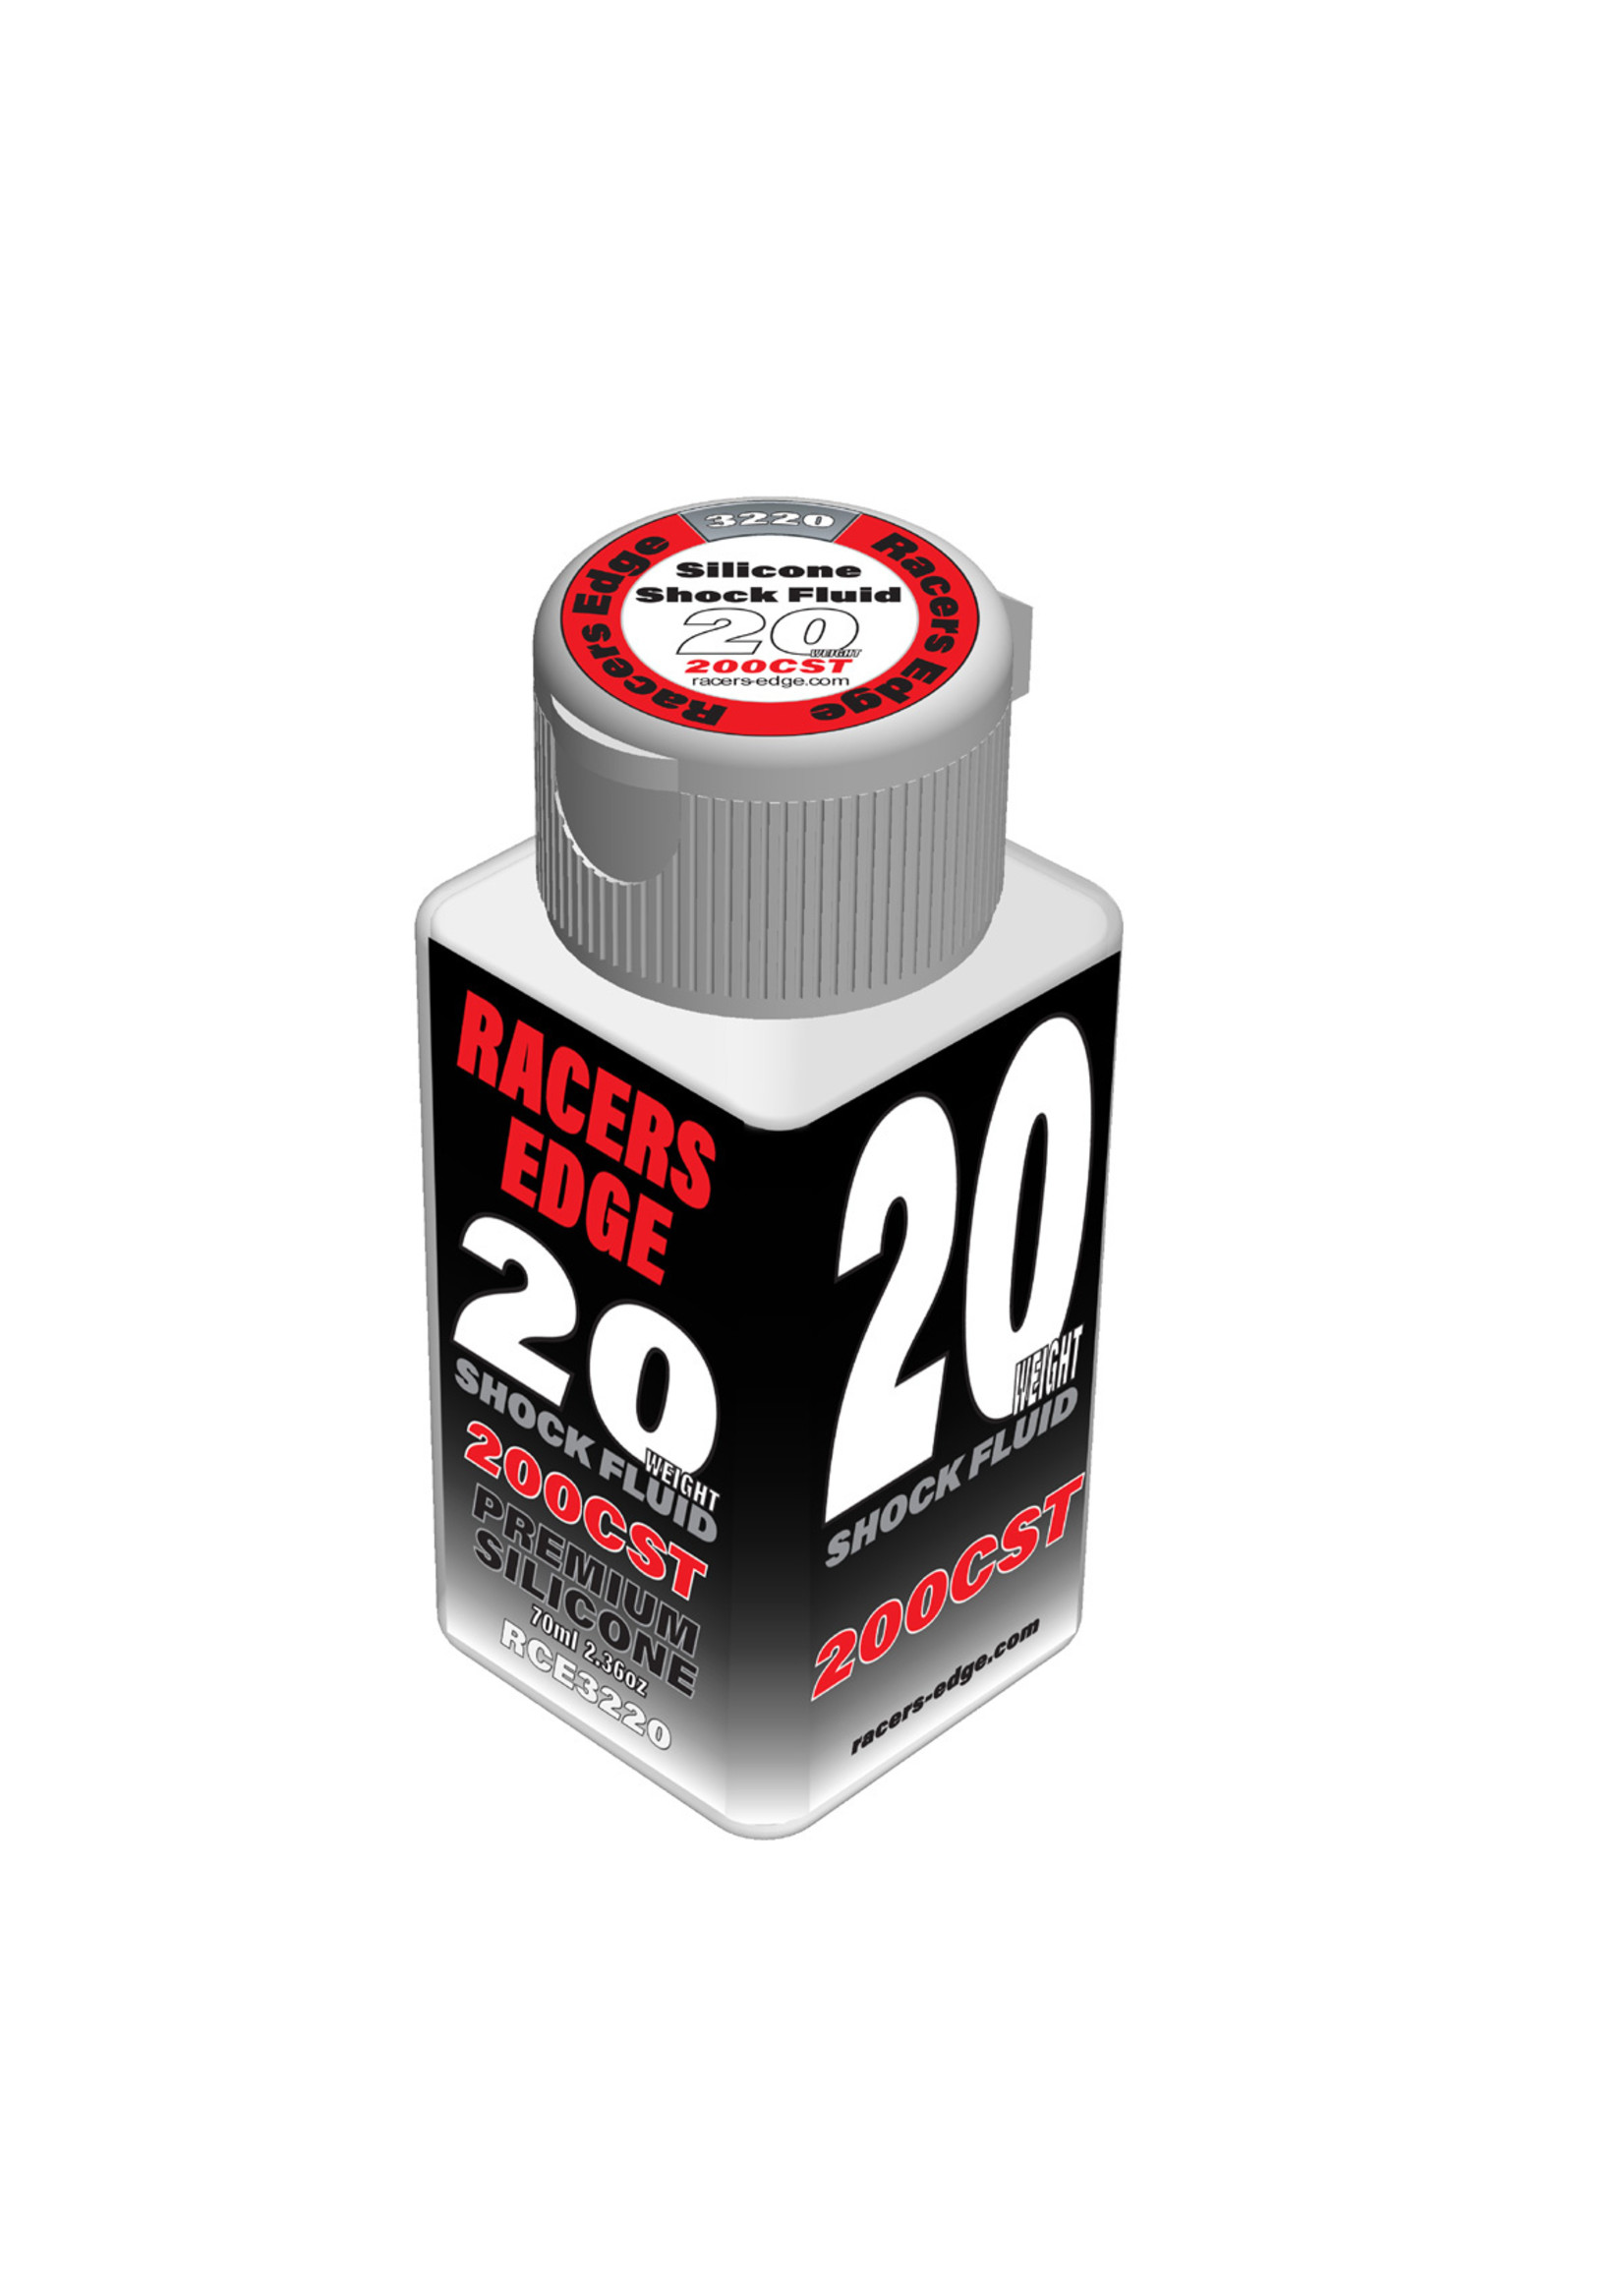 Racers Edge RCE3220 - 20 Weight, 200cSt, 70ml 2.36oz Pure Silicone Shock Oil